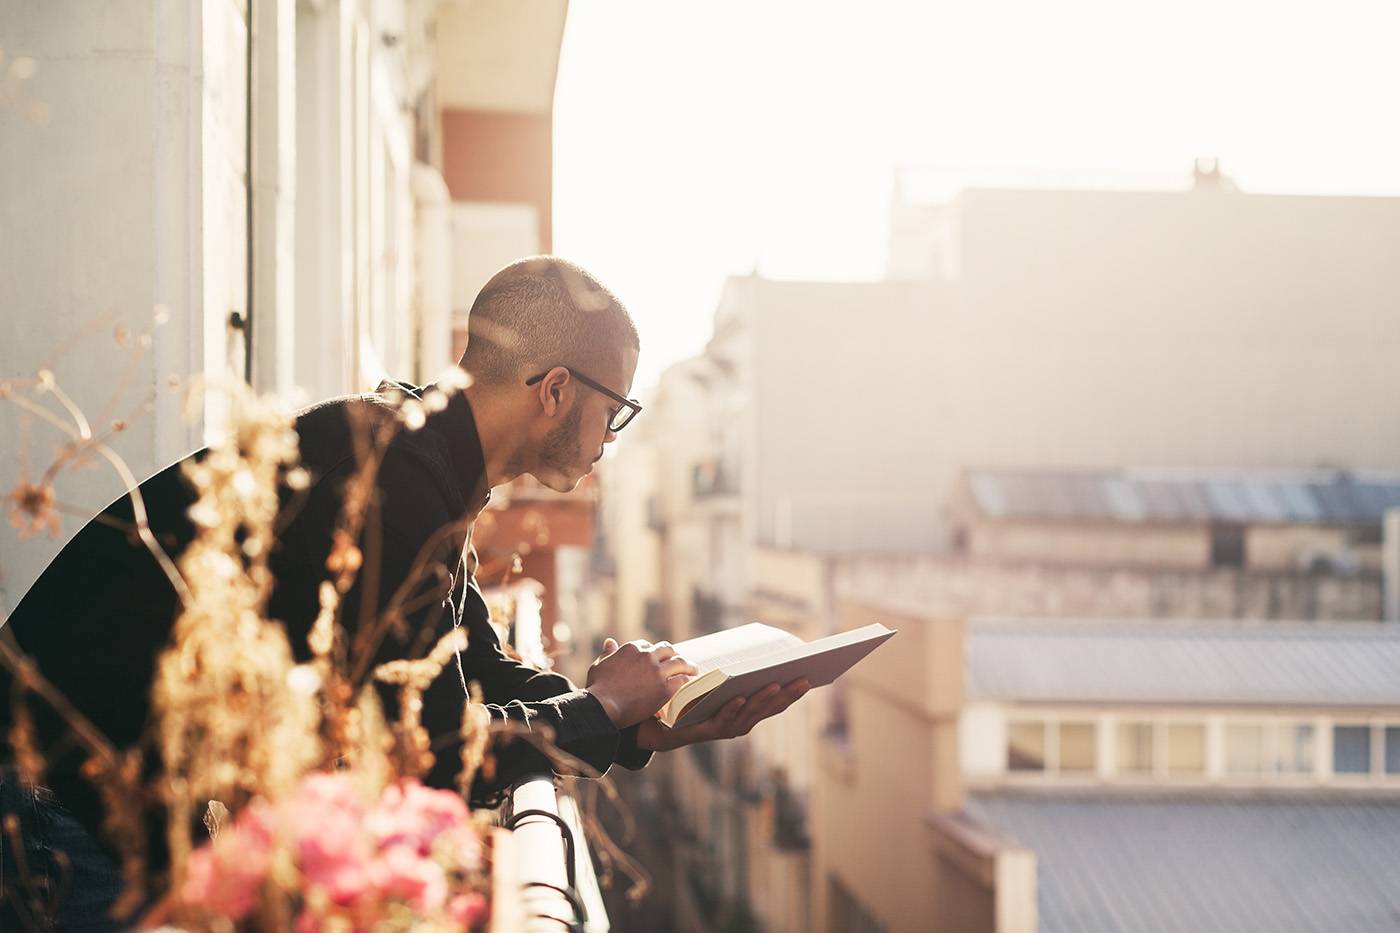 Latin Man In The Balcony Reading A Book At Sunrise.